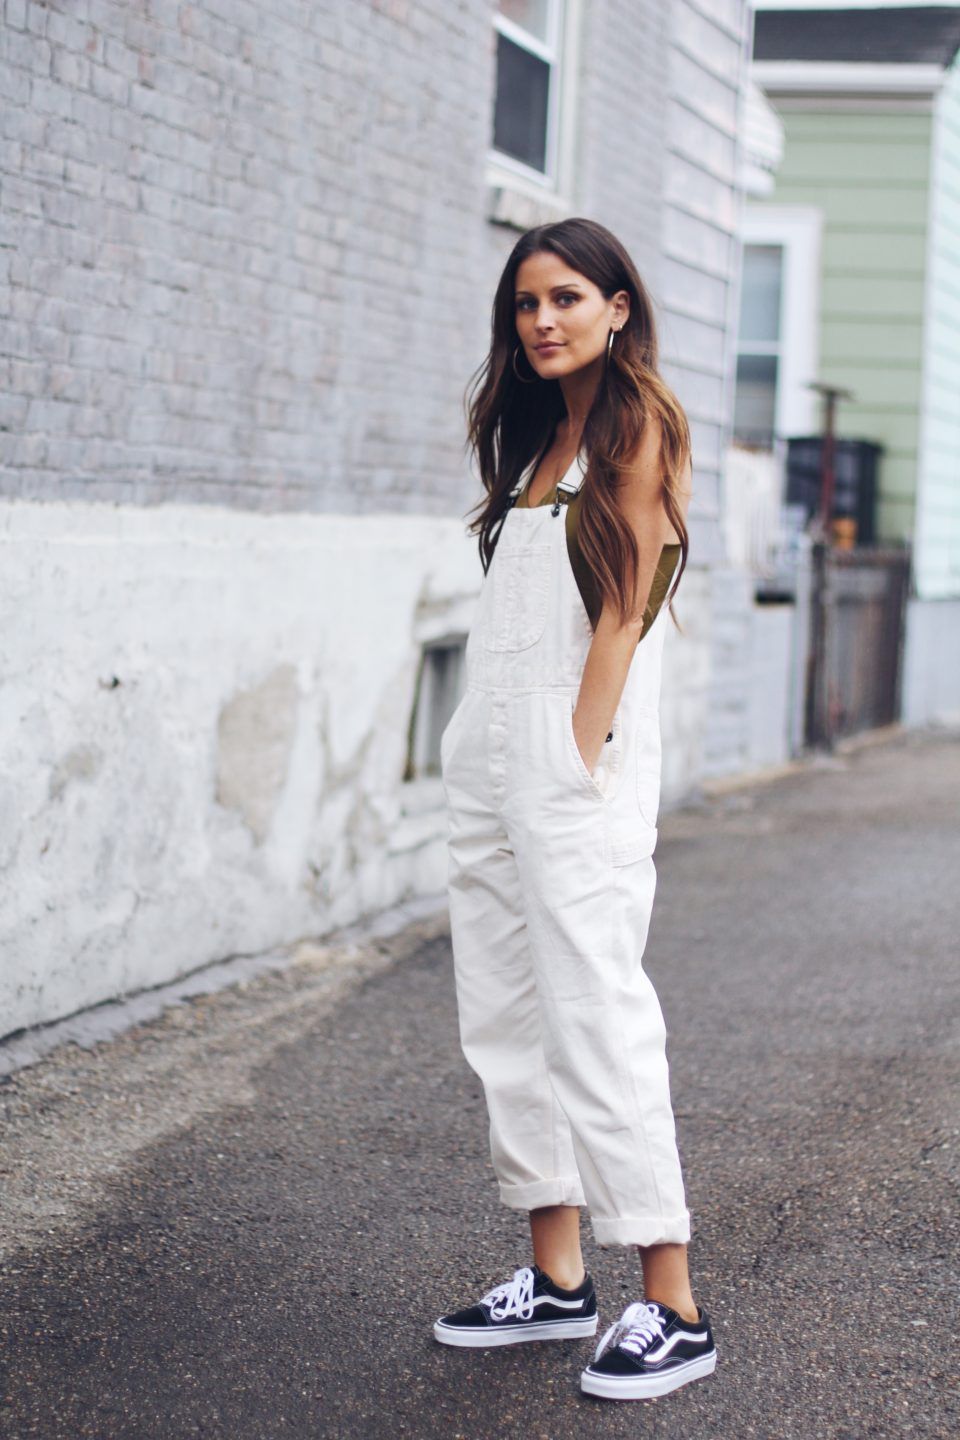 Denim Overalls, White Sweater And White
Sneakers Outfit